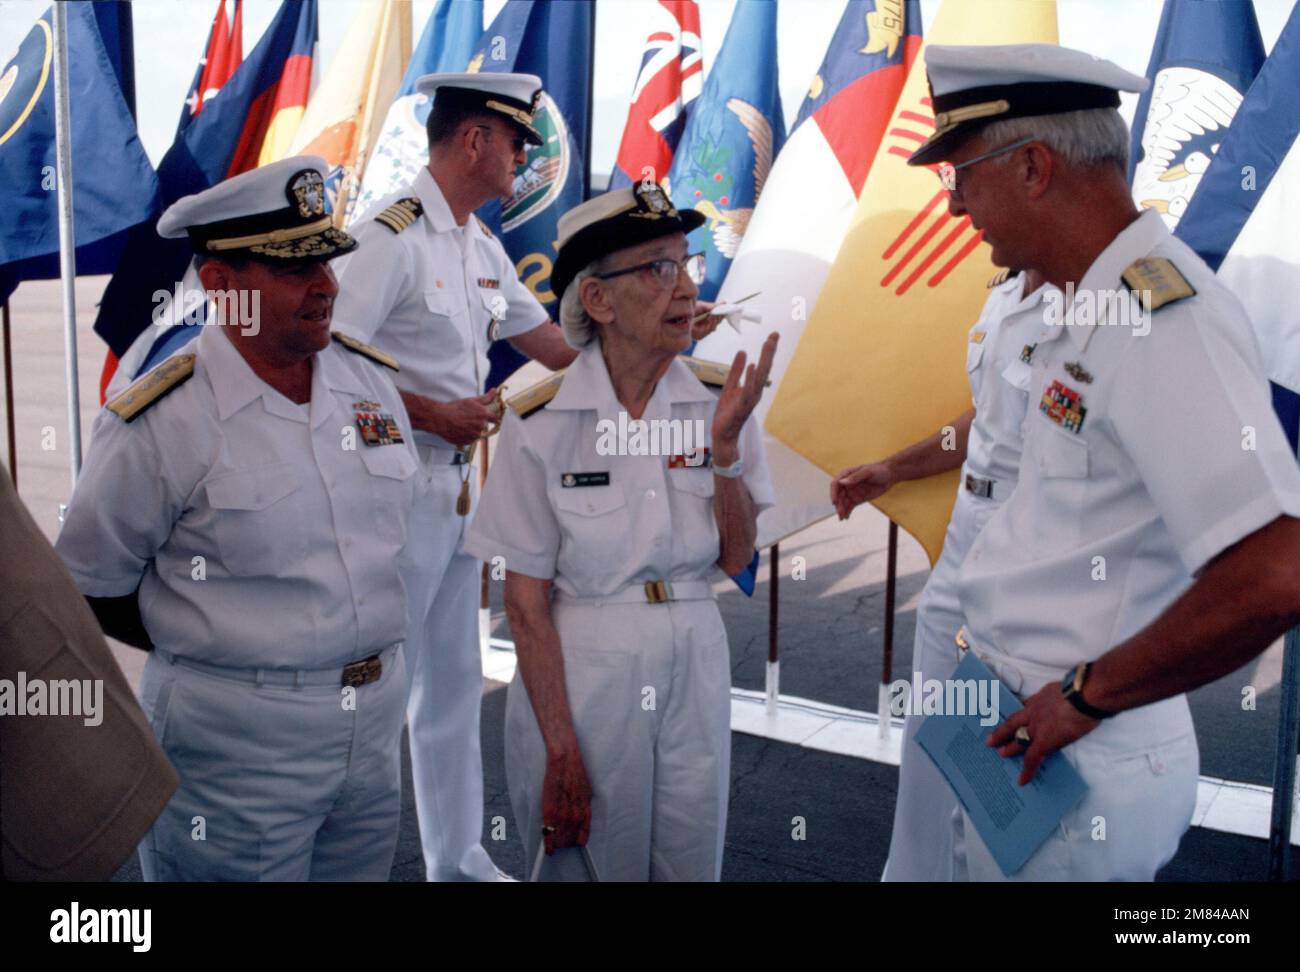 Commodore Grace M. Hopper, Special Assistant to the Commander, Naval Data Automation Command, speaks to Rear Admiral John W. Nyquist, Director, Surface Combat Systems, Office of the CHIEF of Naval Operations, and Rear Admiral Paul E. Sutherland Jr., Commander, Naval Data Automation Command, Washington, District of Columbia, during the groundbreaking of the Grace M. Hopper Navy Regional Data Automation Center. Captain C. T. Smith, Commanding Officer, Navy Regional Data Automation Center, is standing in the background. Base: Naval Air Station, North Island State: California (CA) Country: United Stock Photo